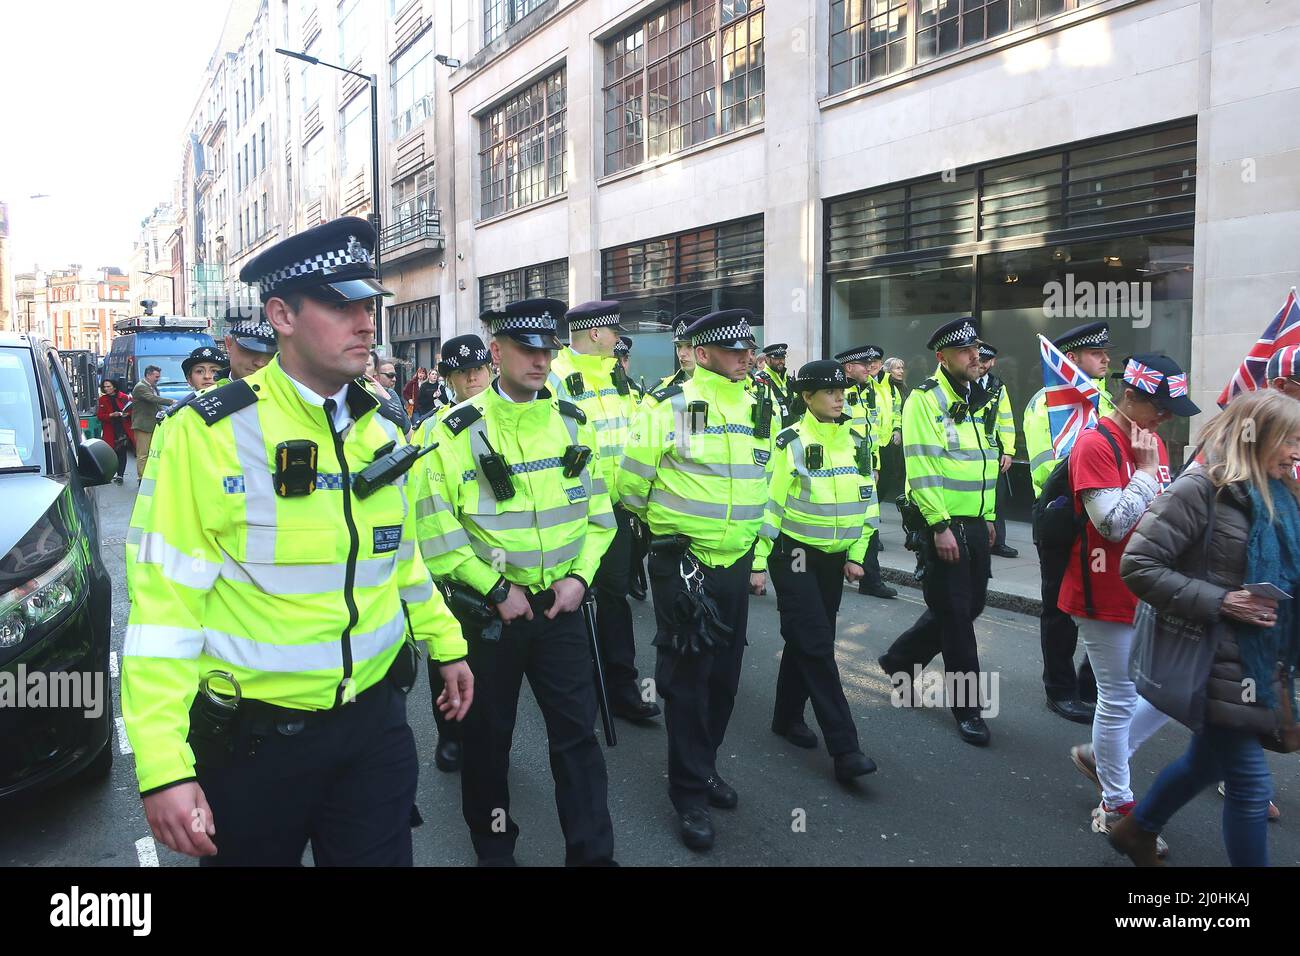 London.19th March 2022. Anti-vaxxers march through Soho. Credit: Brian minkoff/Alamy Live News Stock Photo